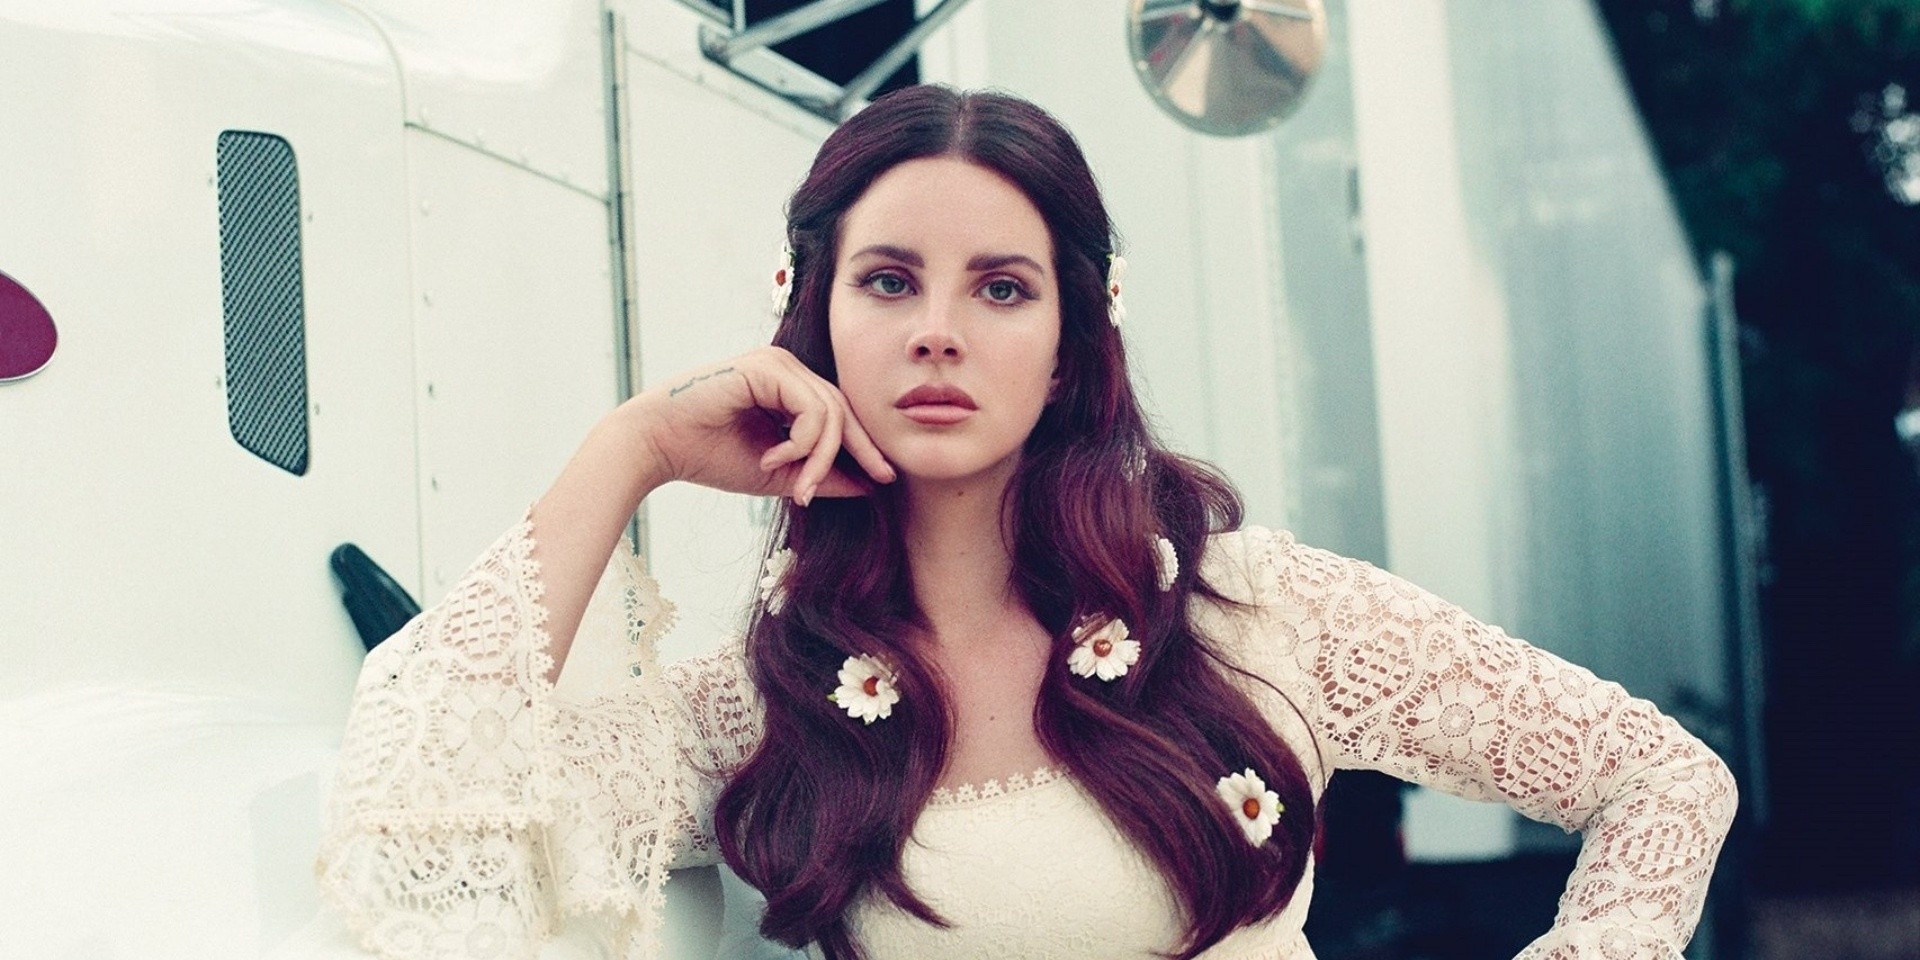 Lana Del Rey debuts a new song ‘How to Disappear’ at the Apple Event